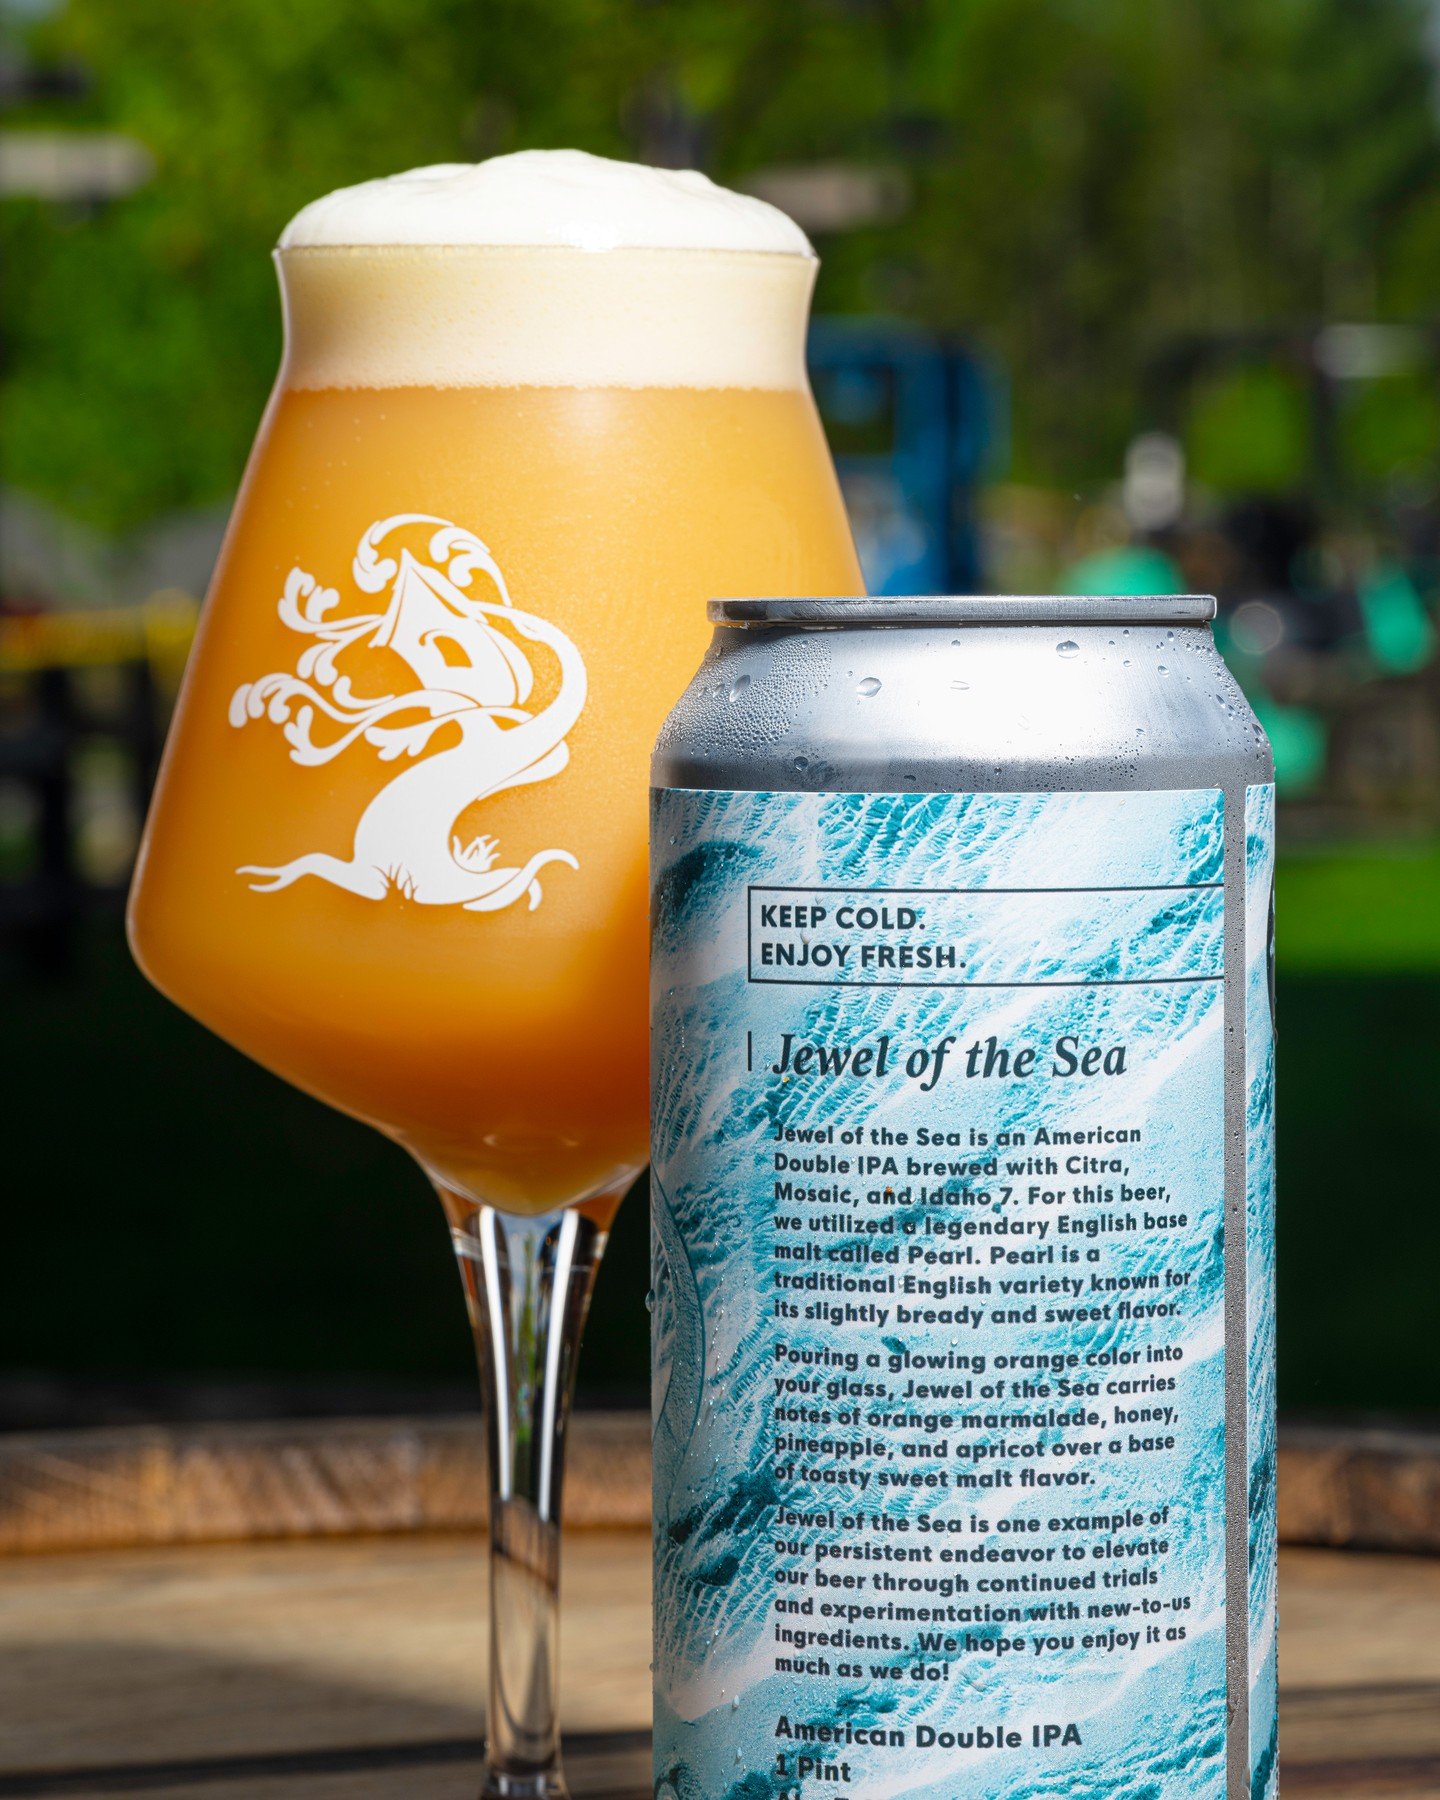 Jewel of the Sea is an American Double IPA brewed with Citra, Mosaic, and Idaho 7. For this beer, we utilized a legendary English base malt called Pearl. Pearl is a traditional English variety known for its slightly bready and sweet flavor. 

Pouring